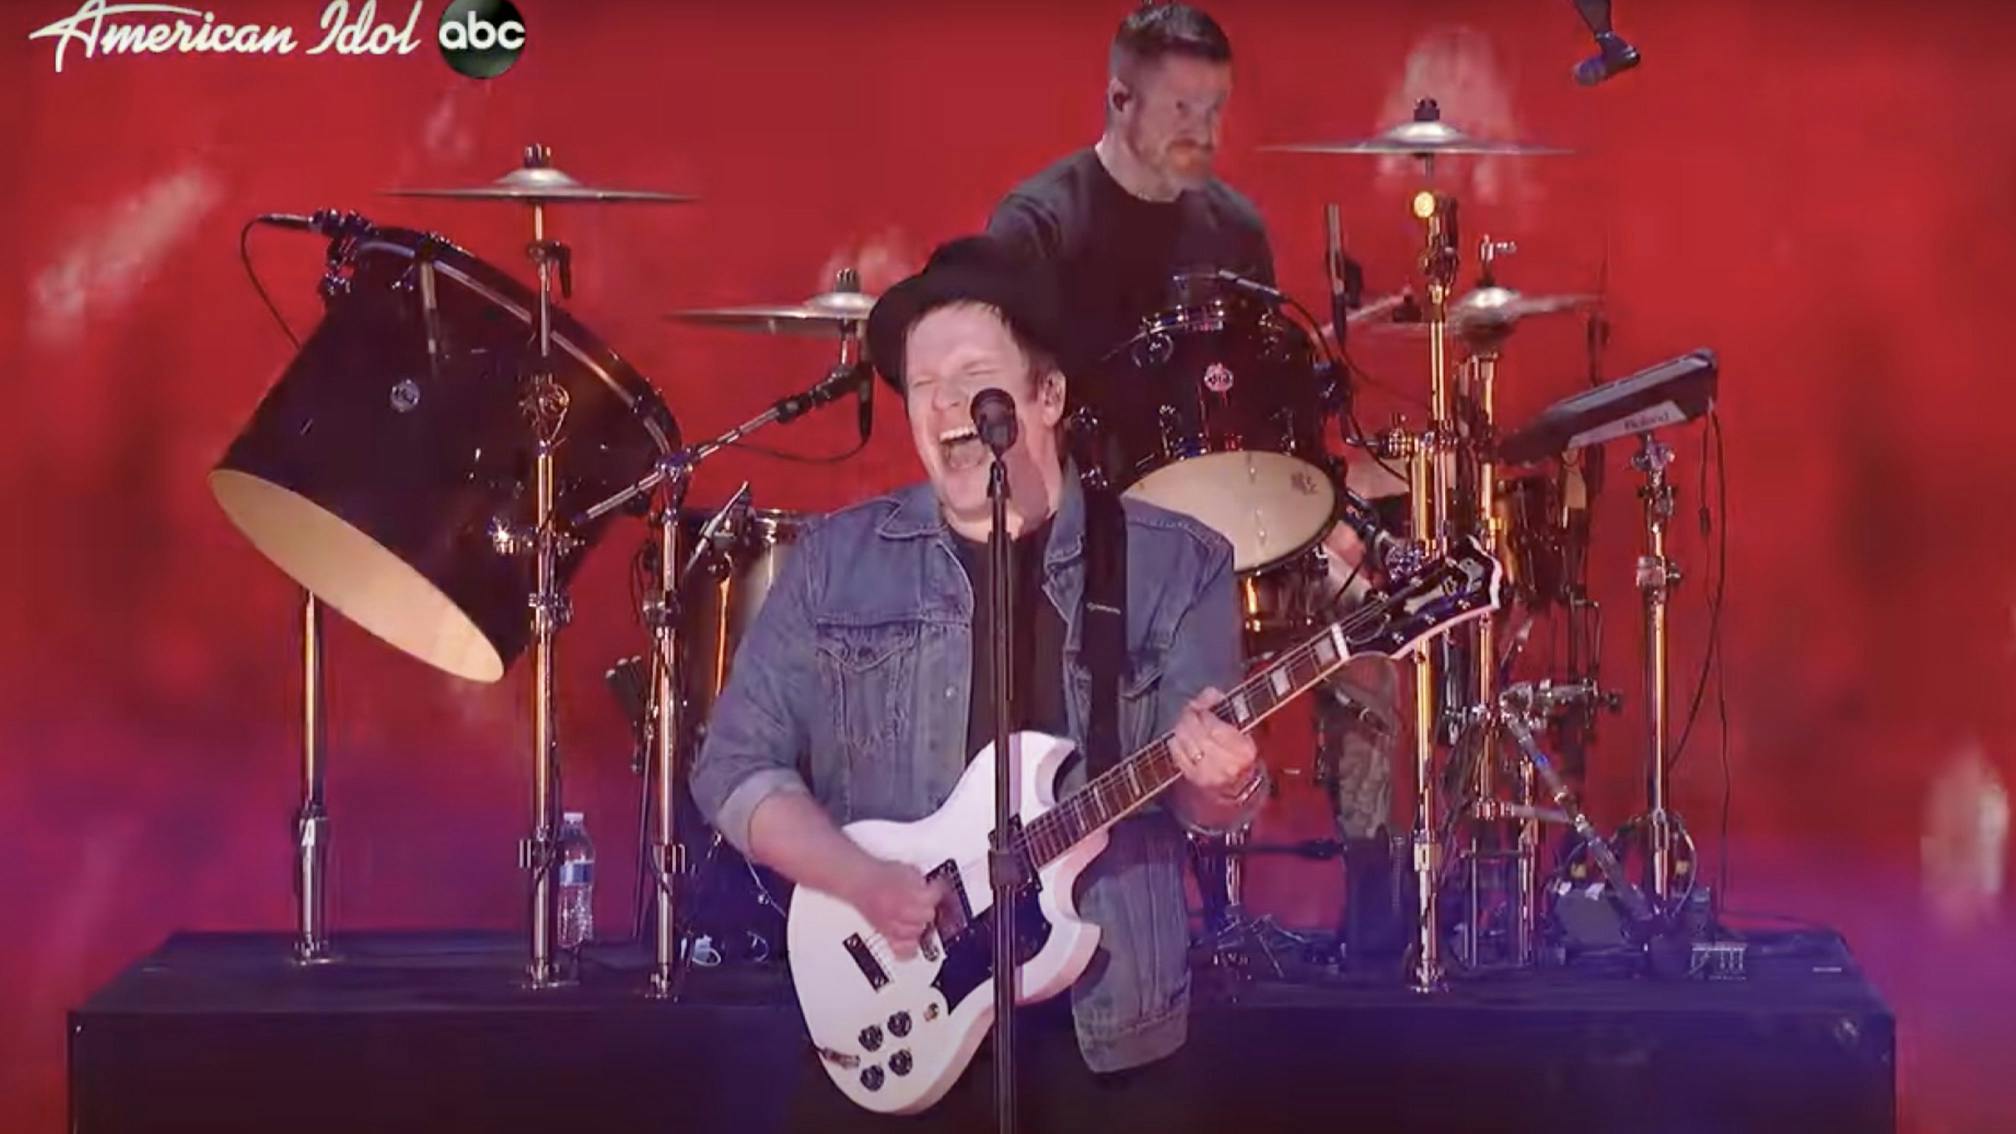 Fall Out Boy perform My Songs Know What You Did In The Dark during American Idol finale